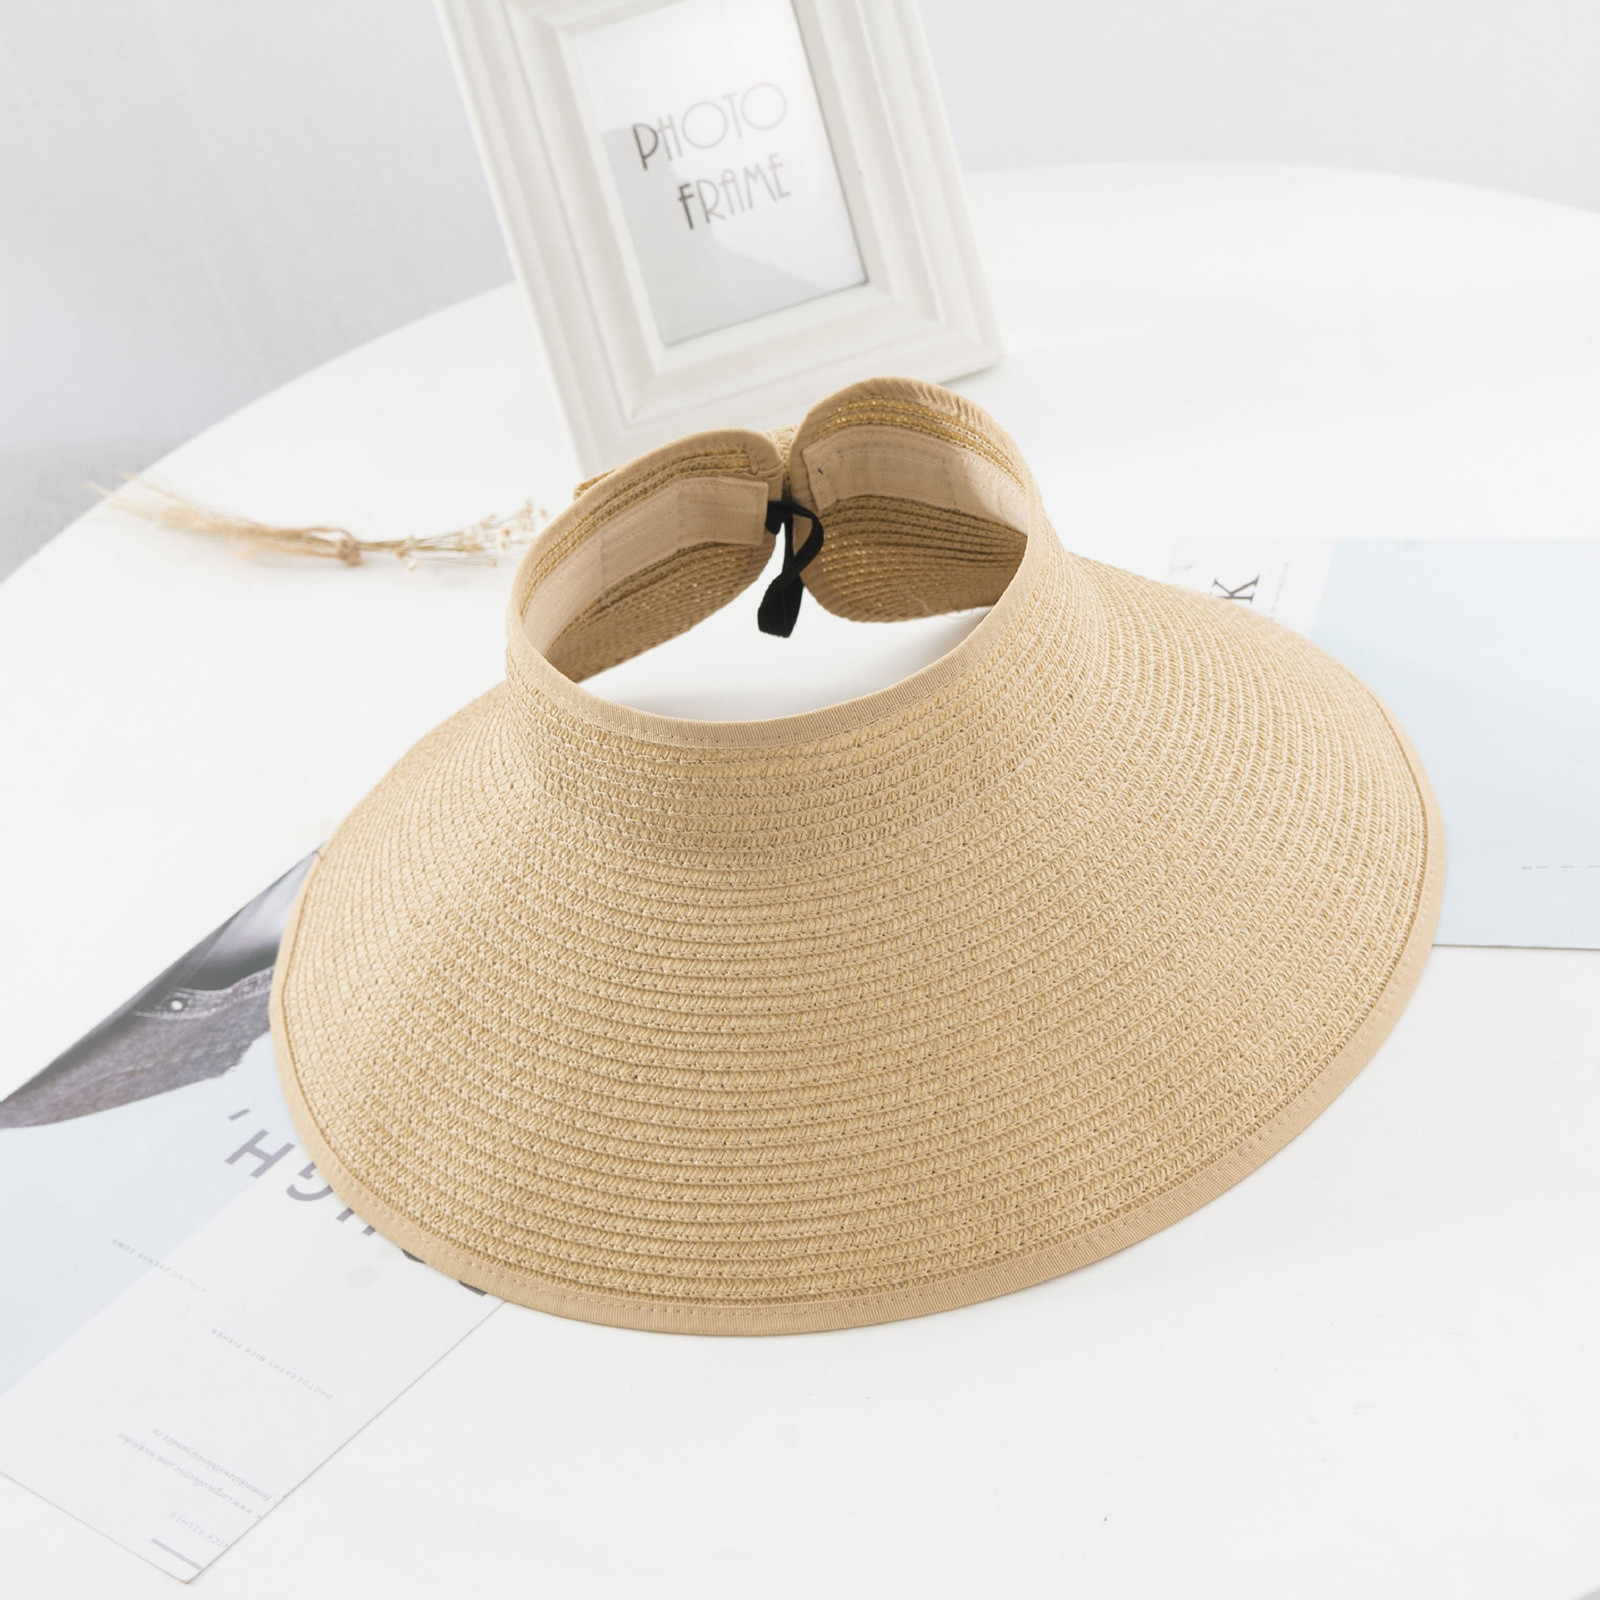 CieKen Women's Fashion Conciseness Wide Rollable Drafting Hat Sun Hat Beach Hat - image 2 of 3